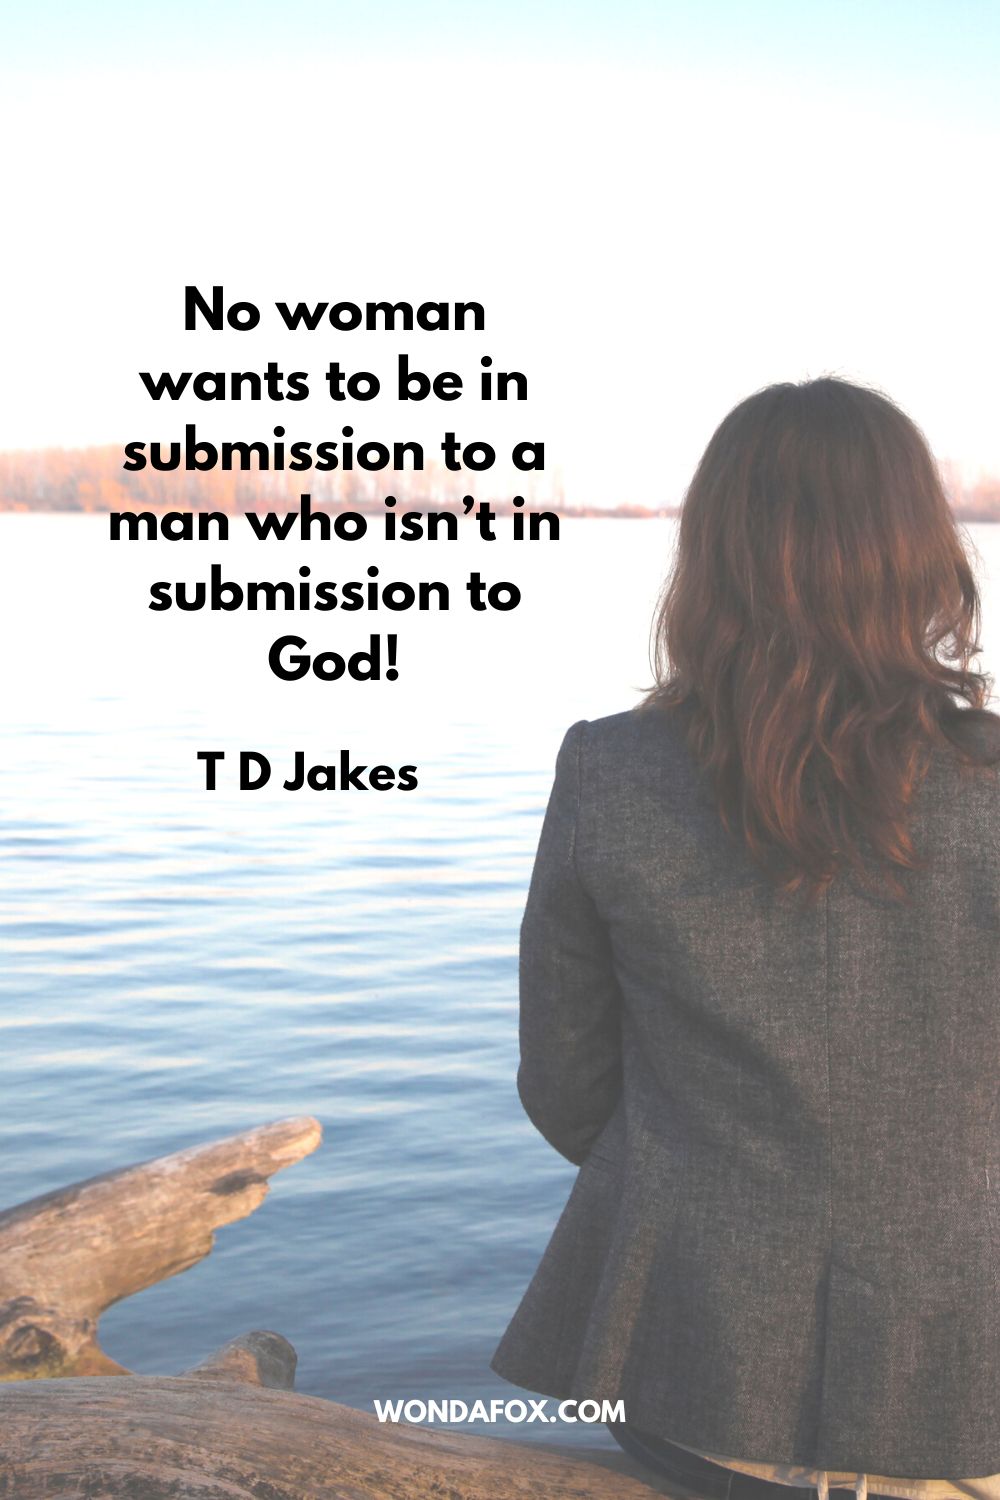 No woman wants to be in submission to a man who isn’t in submission to God! T D Jakes